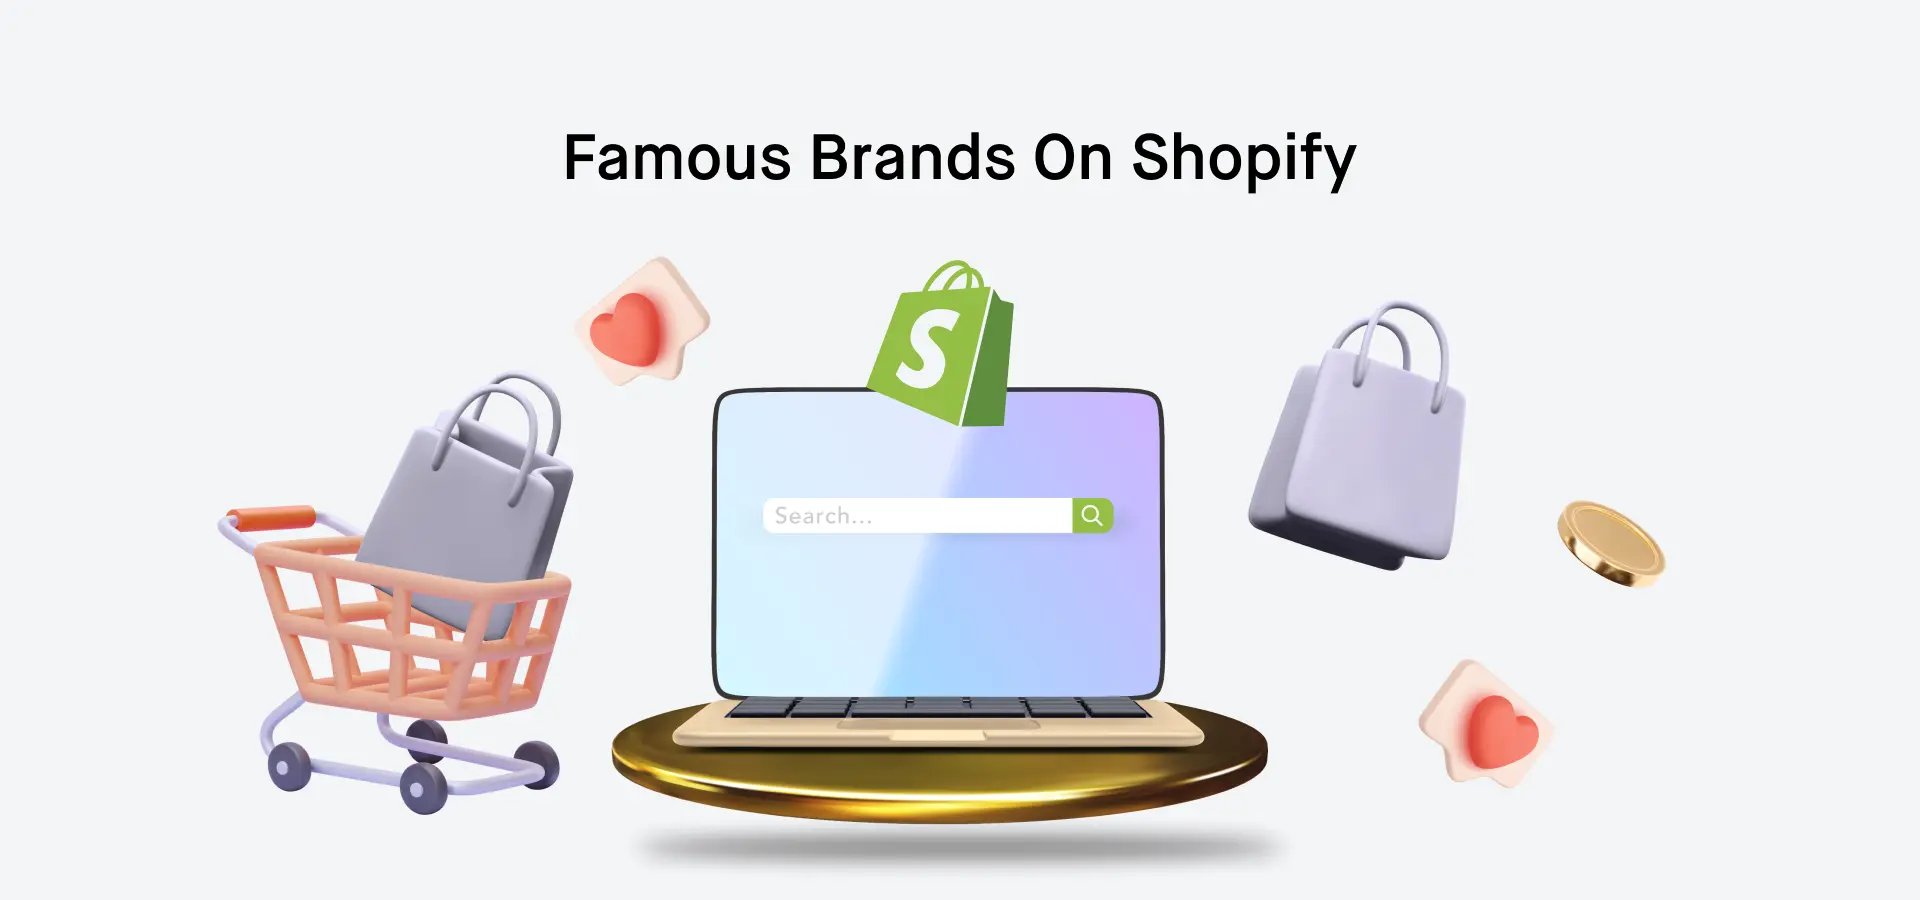 A Suit to Follow: Famous Brands That Use Shopify